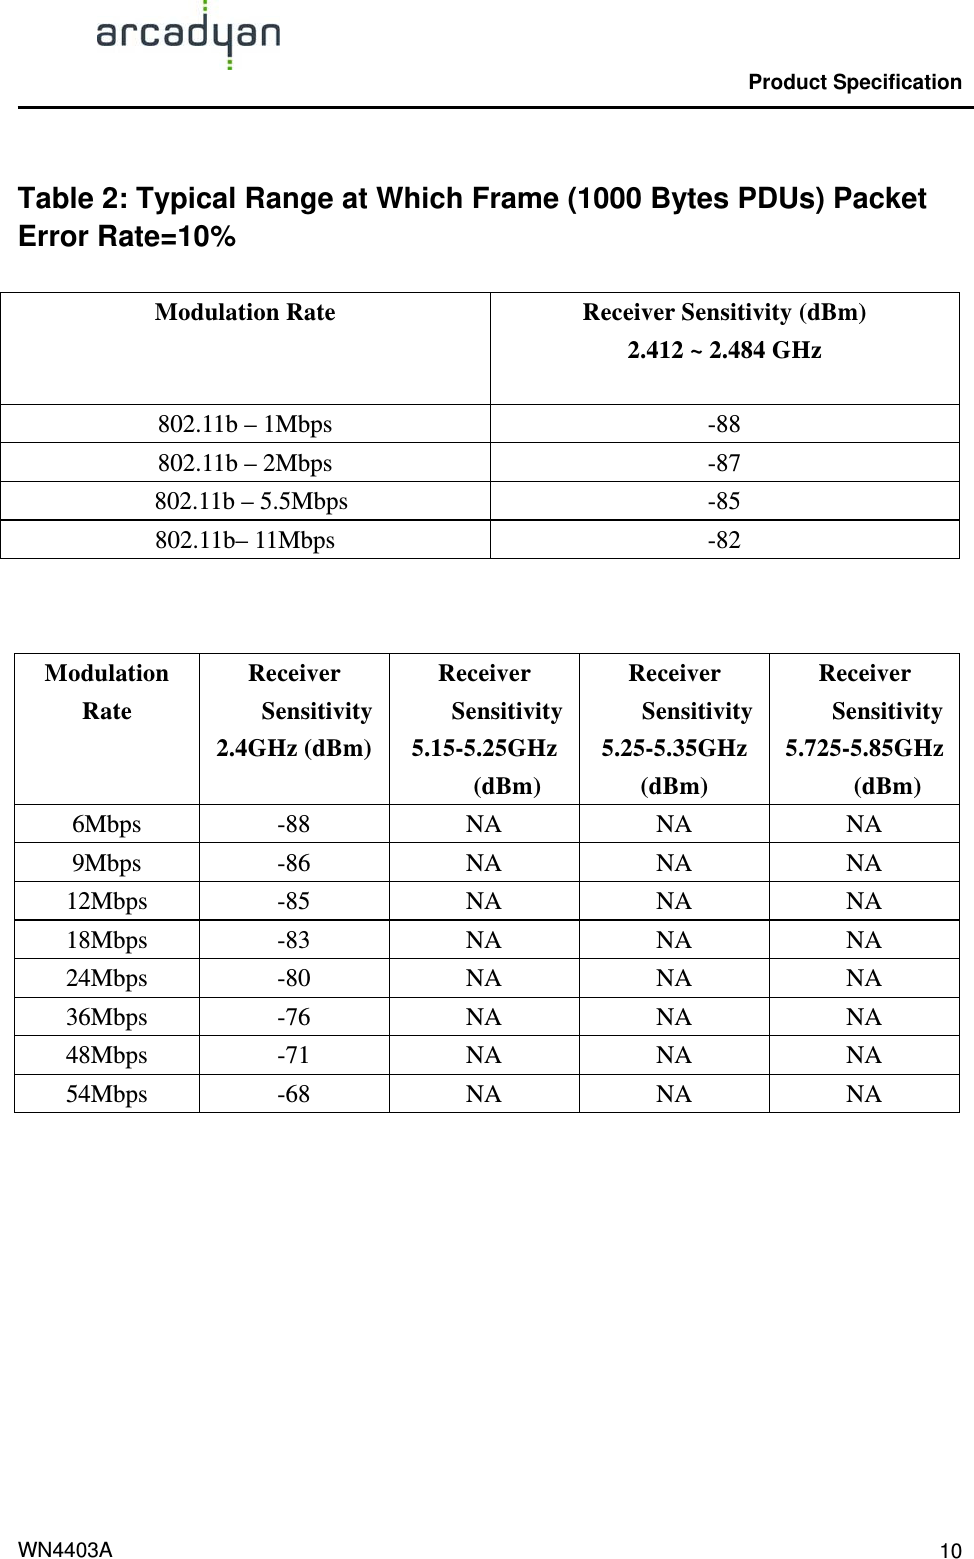                                                Product Specification                                              WN4403A  10 Table 2: Typical Range at Which Frame (1000 Bytes PDUs) Packet Error Rate=10% Modulation Rate  Receiver Sensitivity (dBm) 2.412 ~ 2.484 GHz 802.11b – 1Mbps  -88 802.11b – 2Mbps  -87   802.11b – 5.5Mbps  -85 802.11b– 11Mbps  -82   Modulation Rate Receiver Sensitivity 2.4GHz (dBm) Receiver Sensitivity5.15-5.25GHz (dBm) Receiver Sensitivity 5.25-5.35GHz (dBm)  Receiver Sensitivity5.725-5.85GHz (dBm) 6Mbps -88 NA NA NA 9Mbps -86 NA NA NA 12Mbps -85 NA NA NA 18Mbps -83 NA NA NA 24Mbps -80 NA NA NA 36Mbps -76 NA NA NA 48Mbps -71 NA NA NA 54Mbps -68 NA NA NA           